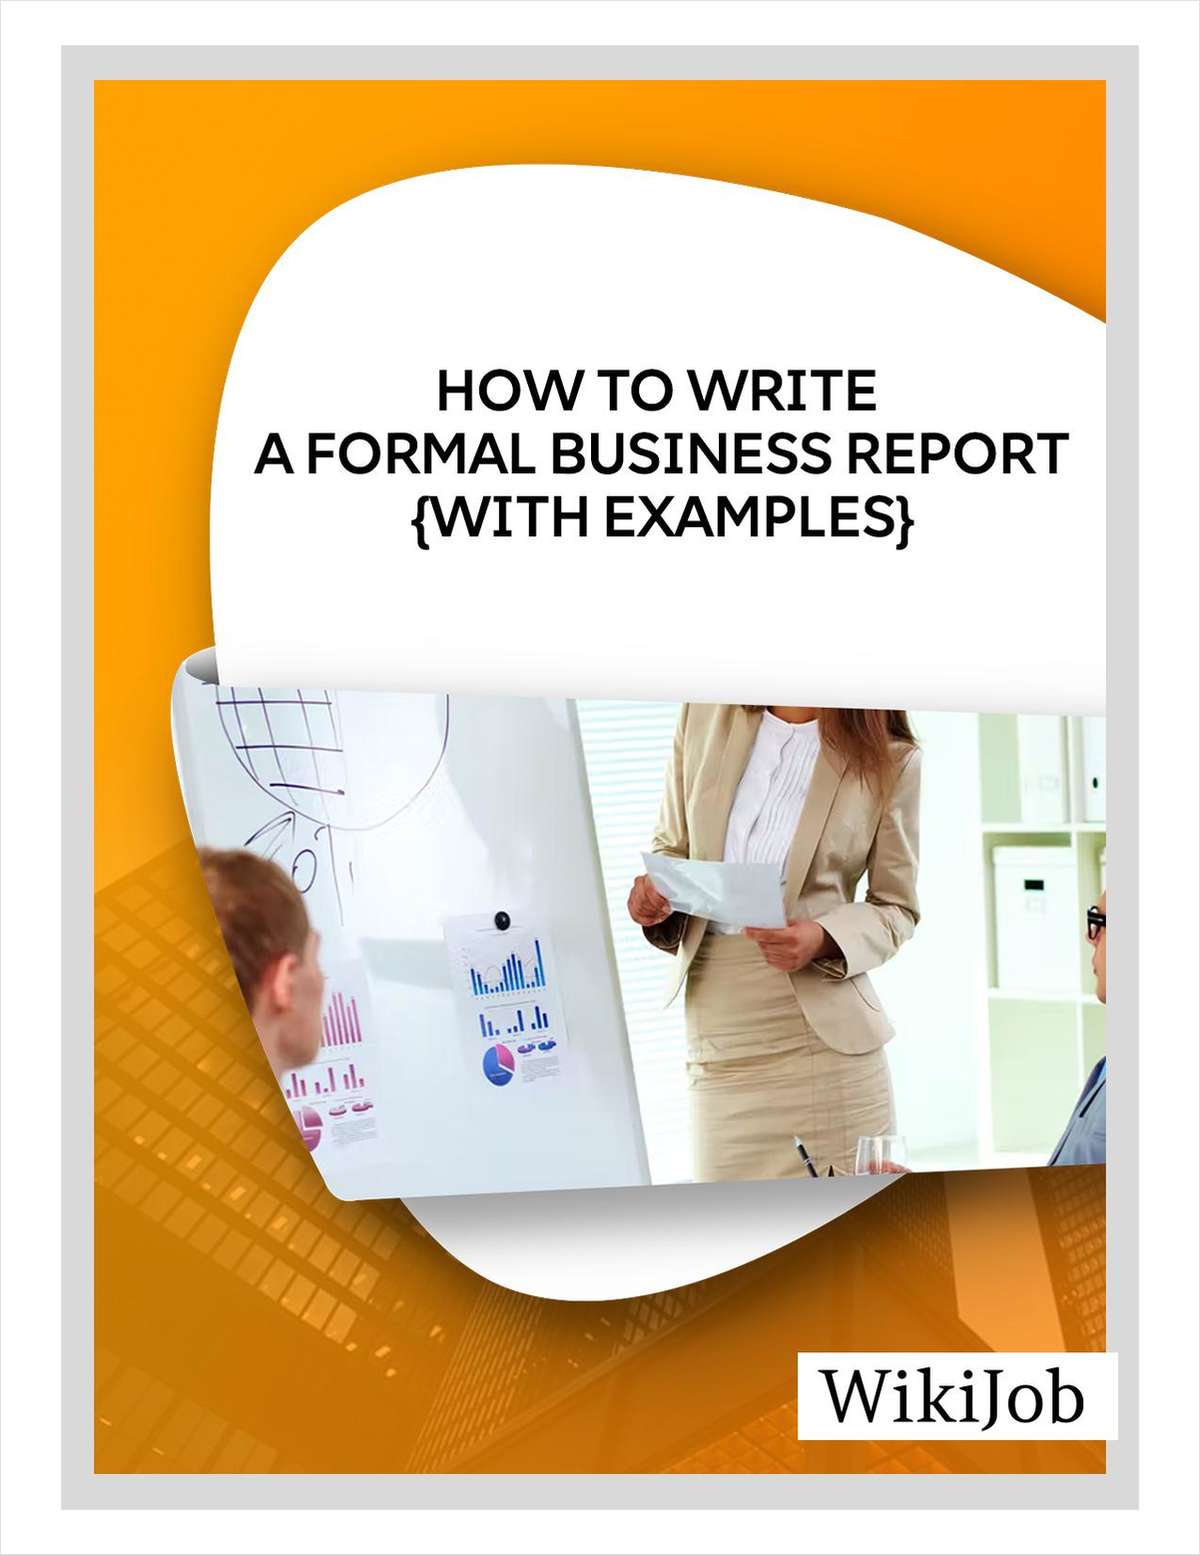 How to Write a Formal Business Report